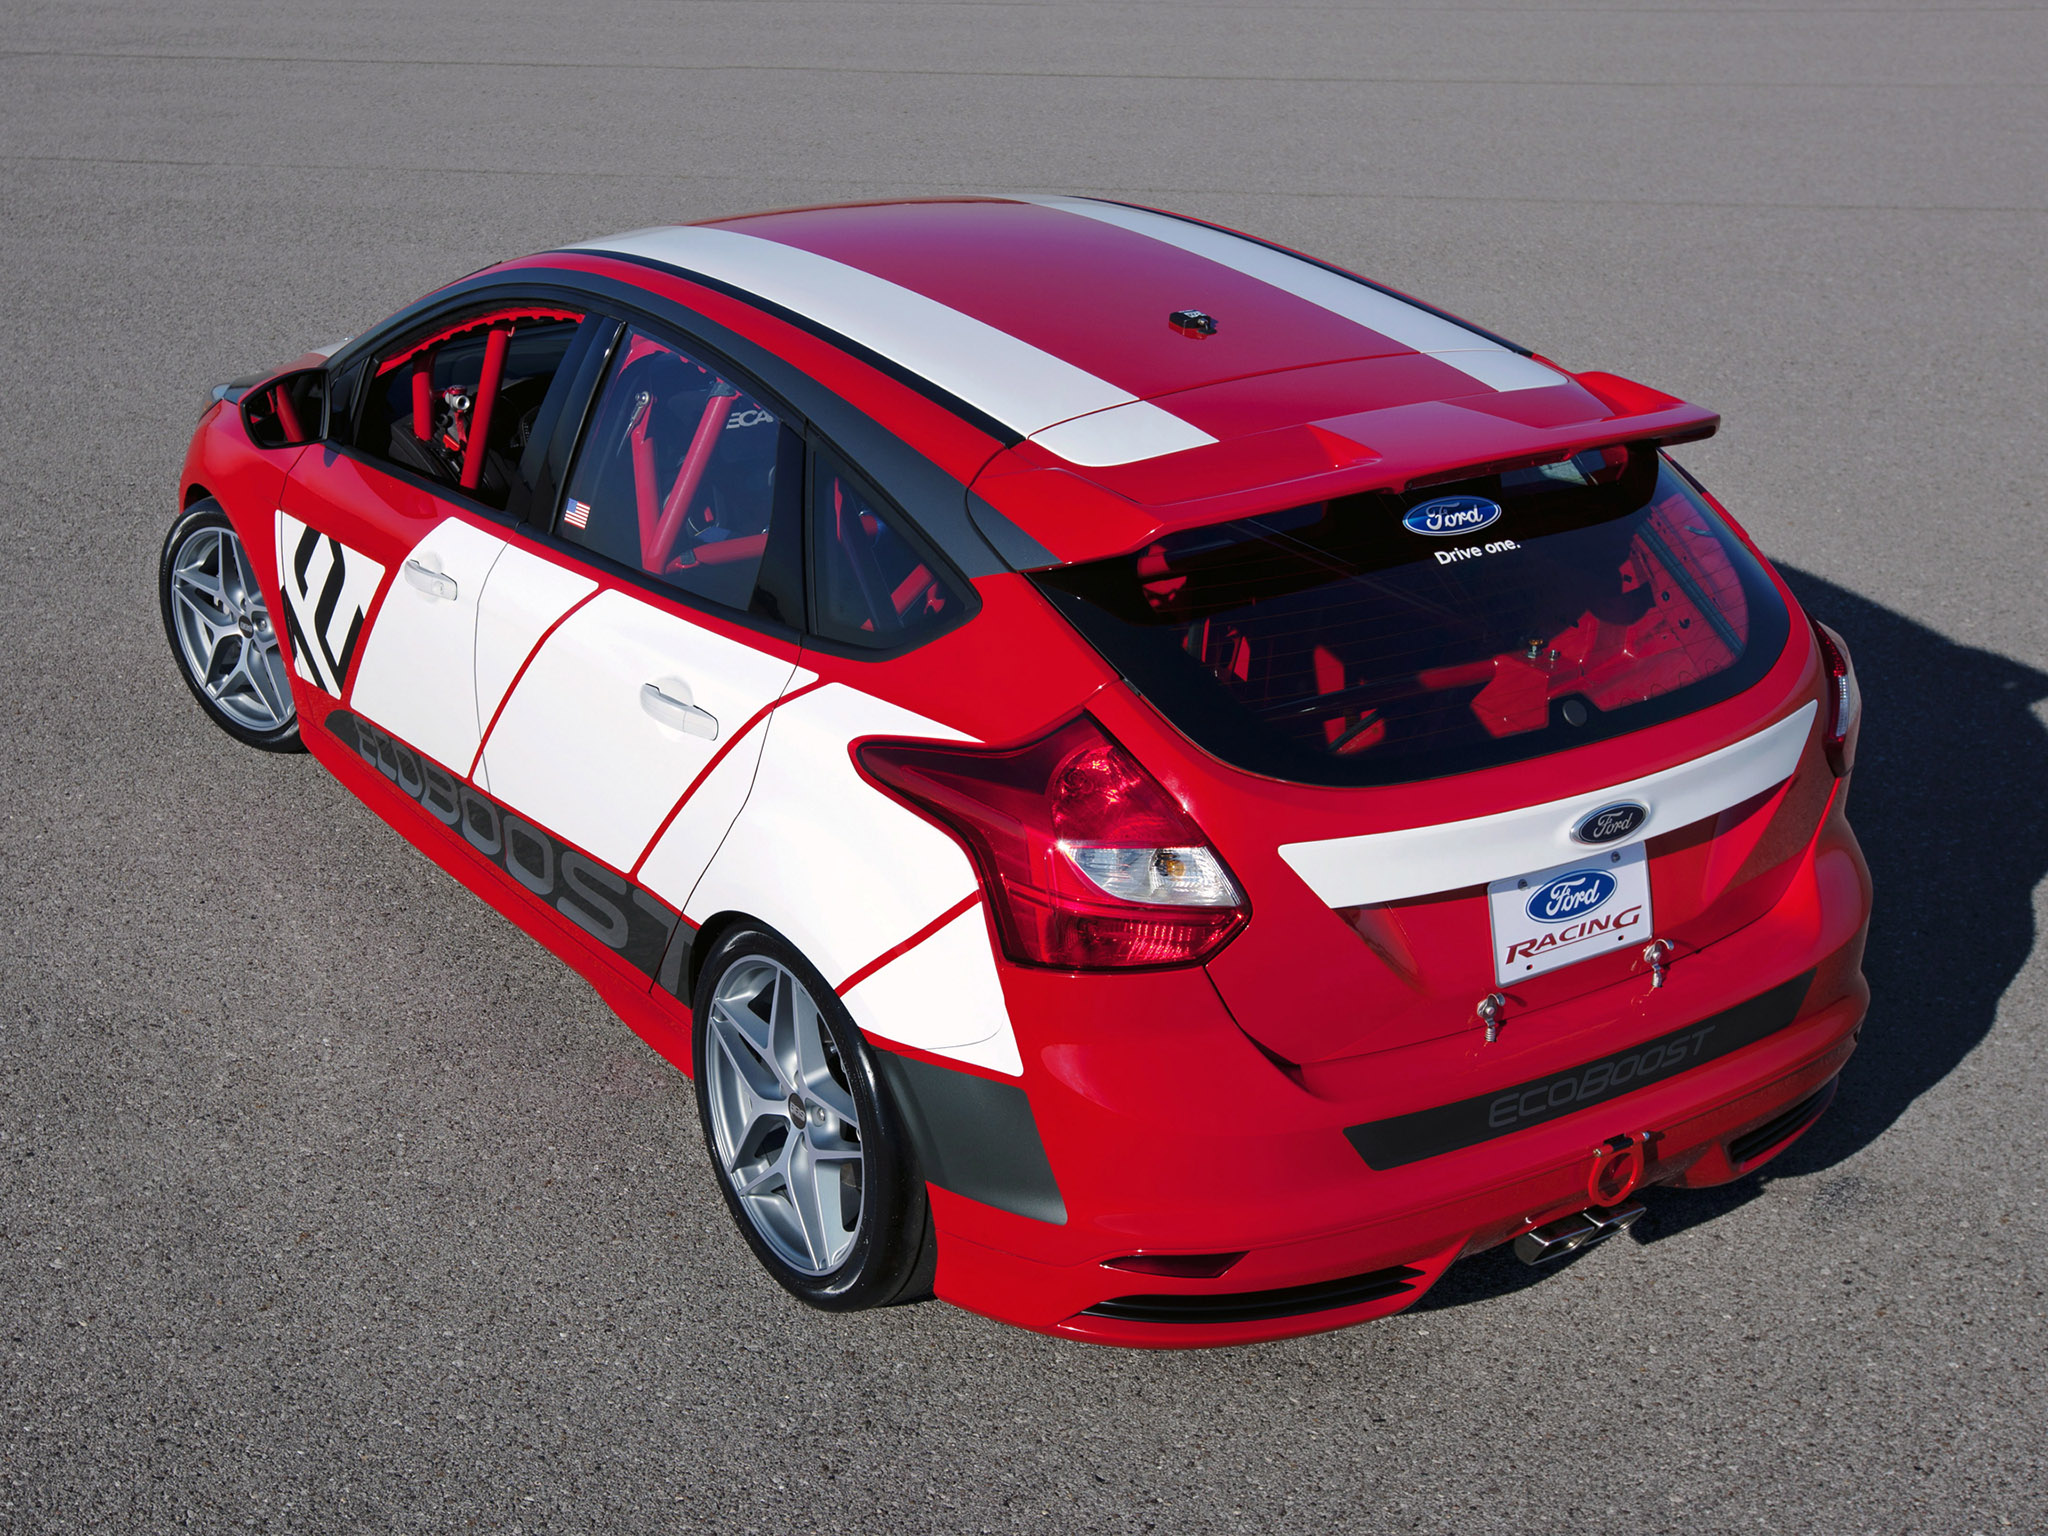 2011, Ford, Focus, Race, Car, Concept, Tuning, Race, Racing Wallpaper